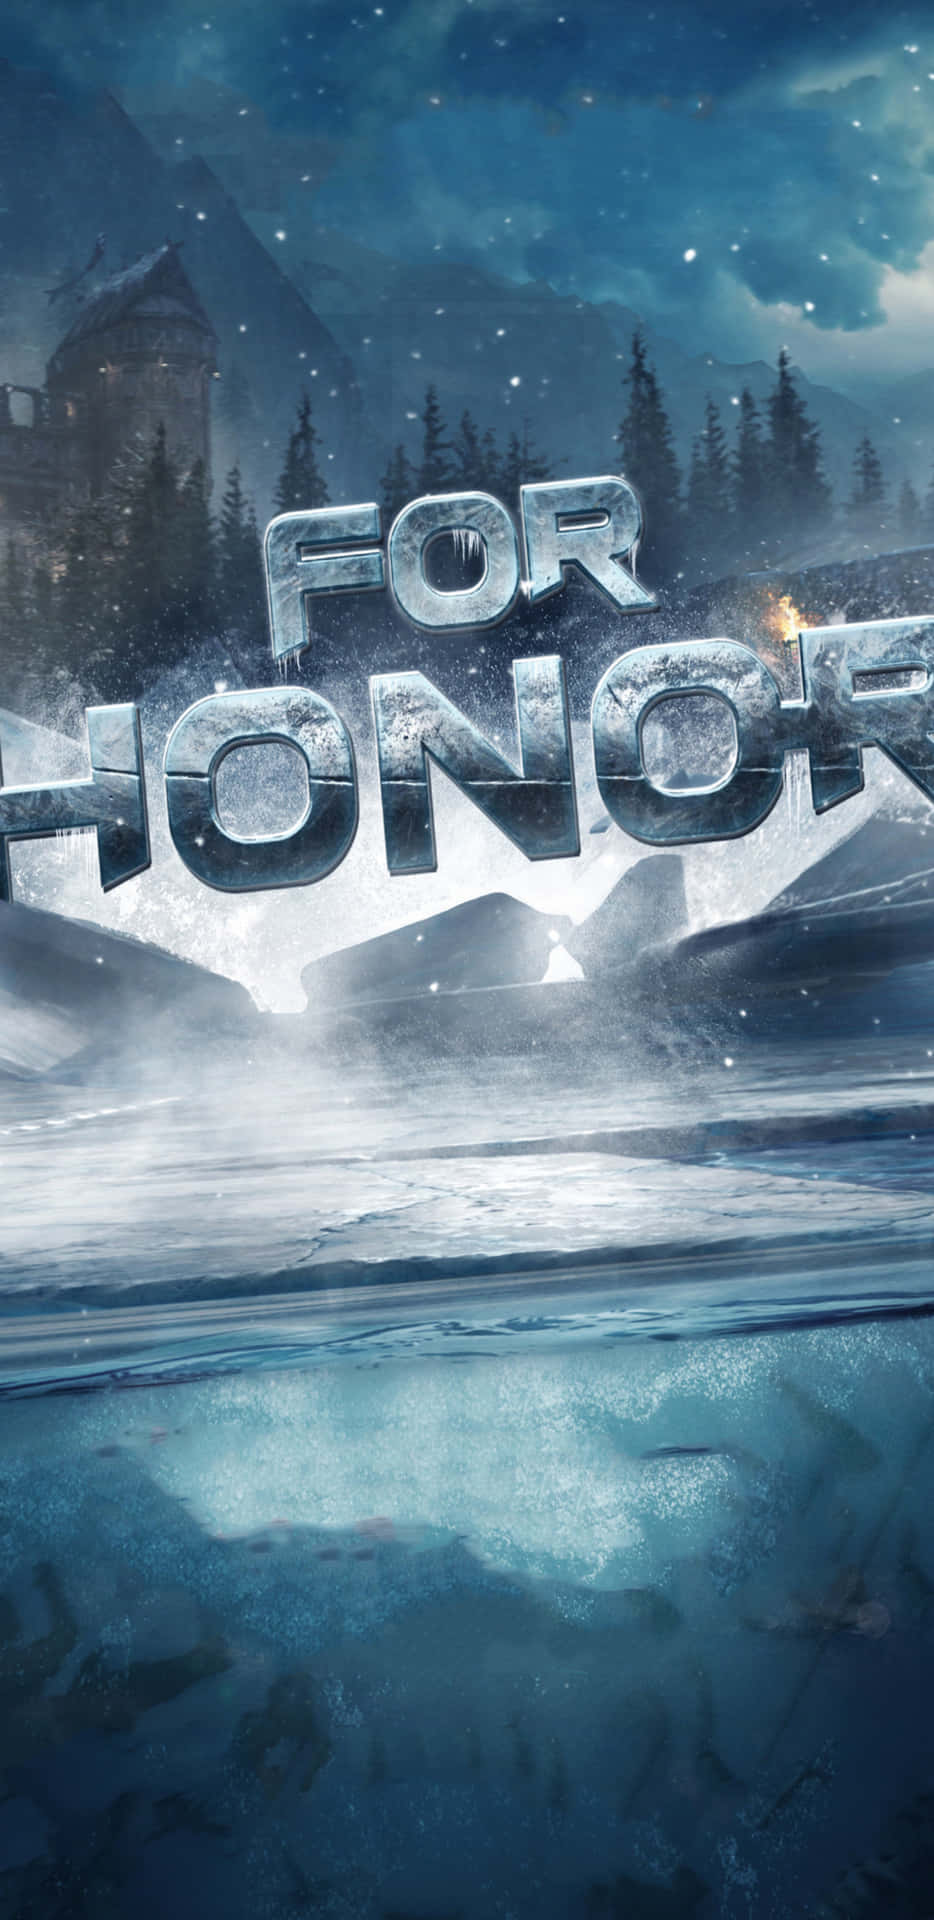 Pixel 3xl For Honor Winter Event Background